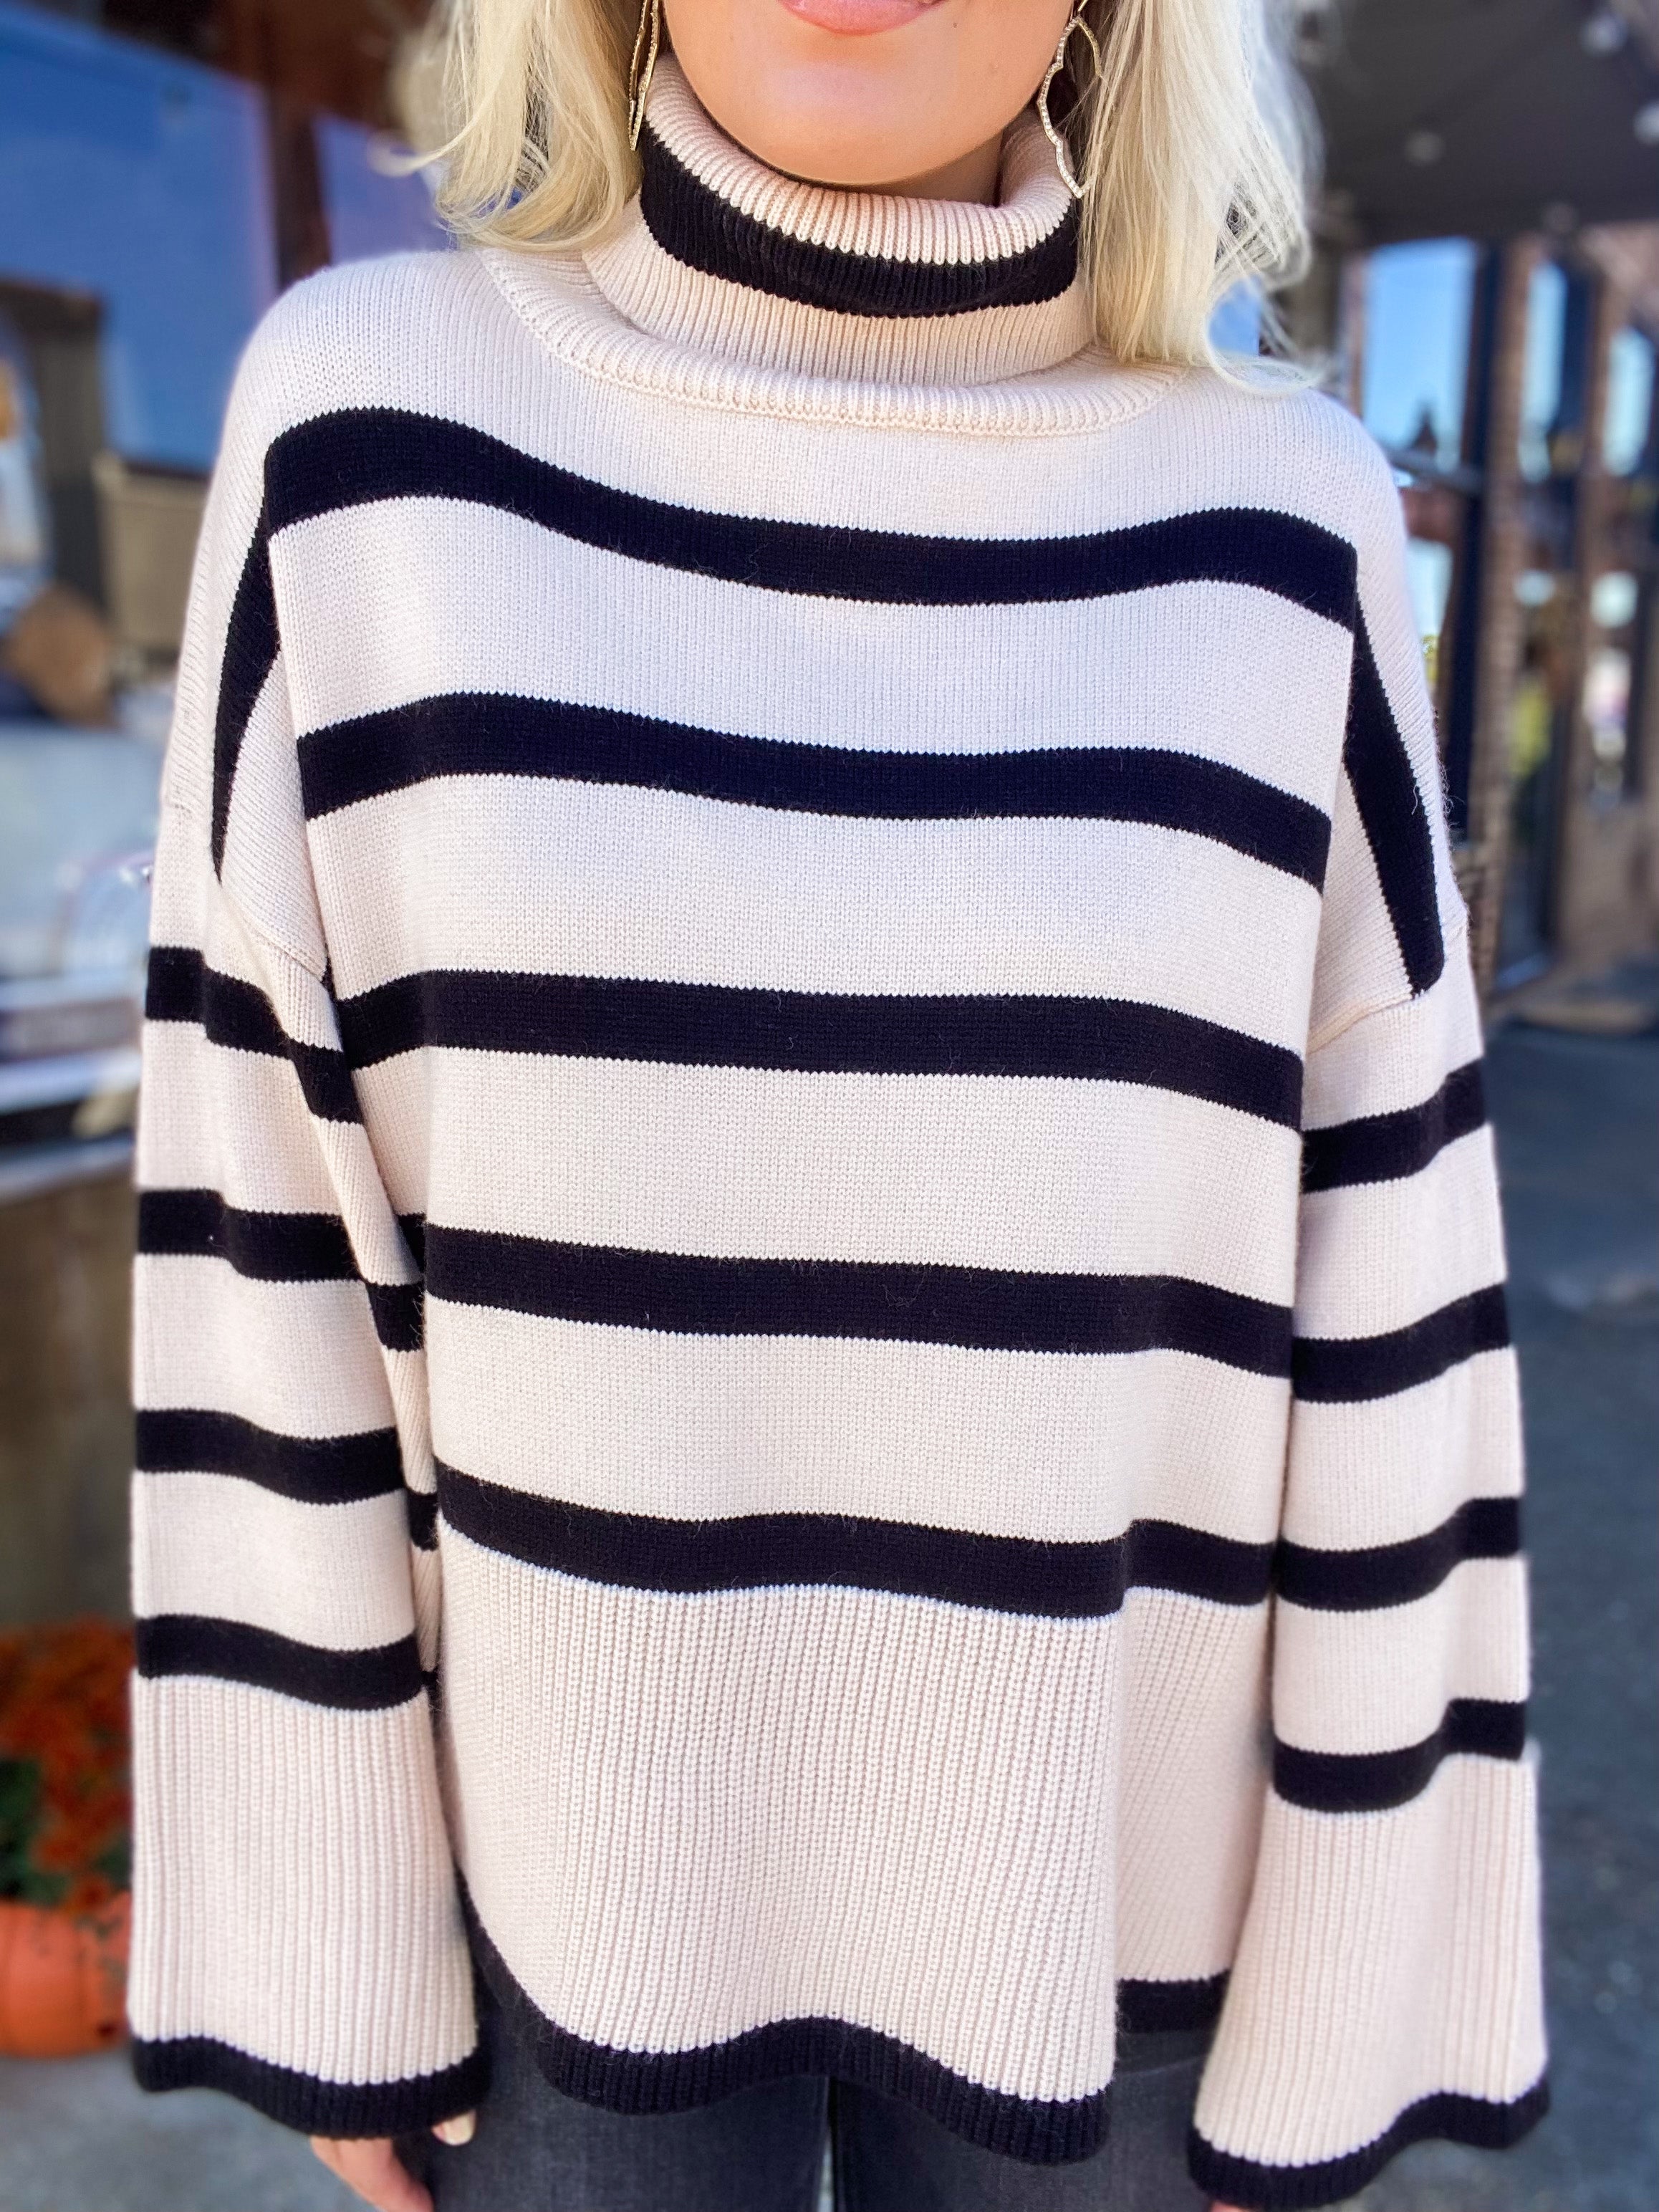 What I Really Want Ivory & Black Striped Turtleneck Sweater